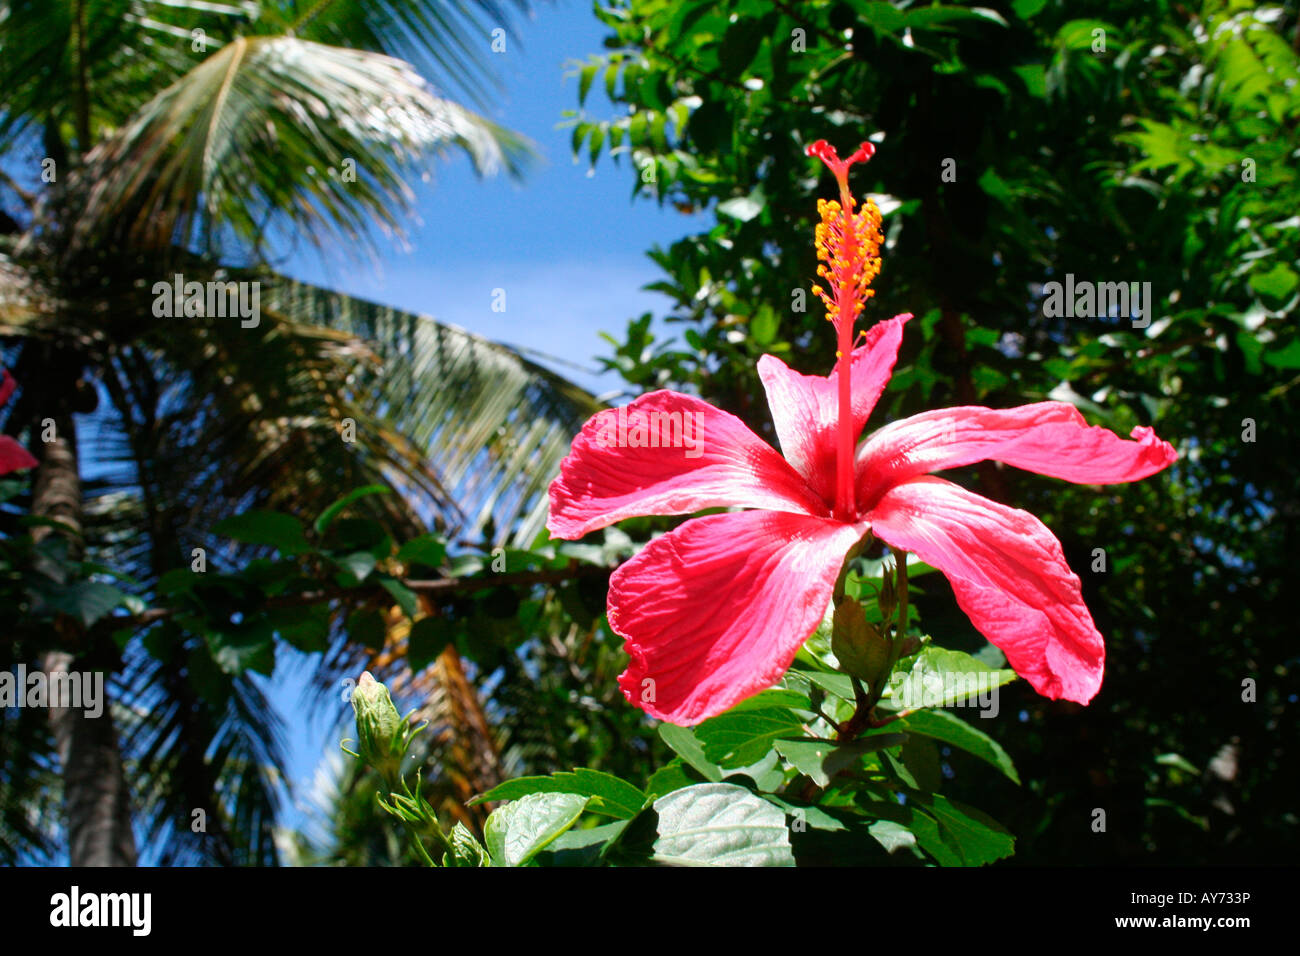 Red hibiscus or shoe-flower - a typical iconic tropical flower - trying to catch sunlight on bright sunny summer day Stock Photo